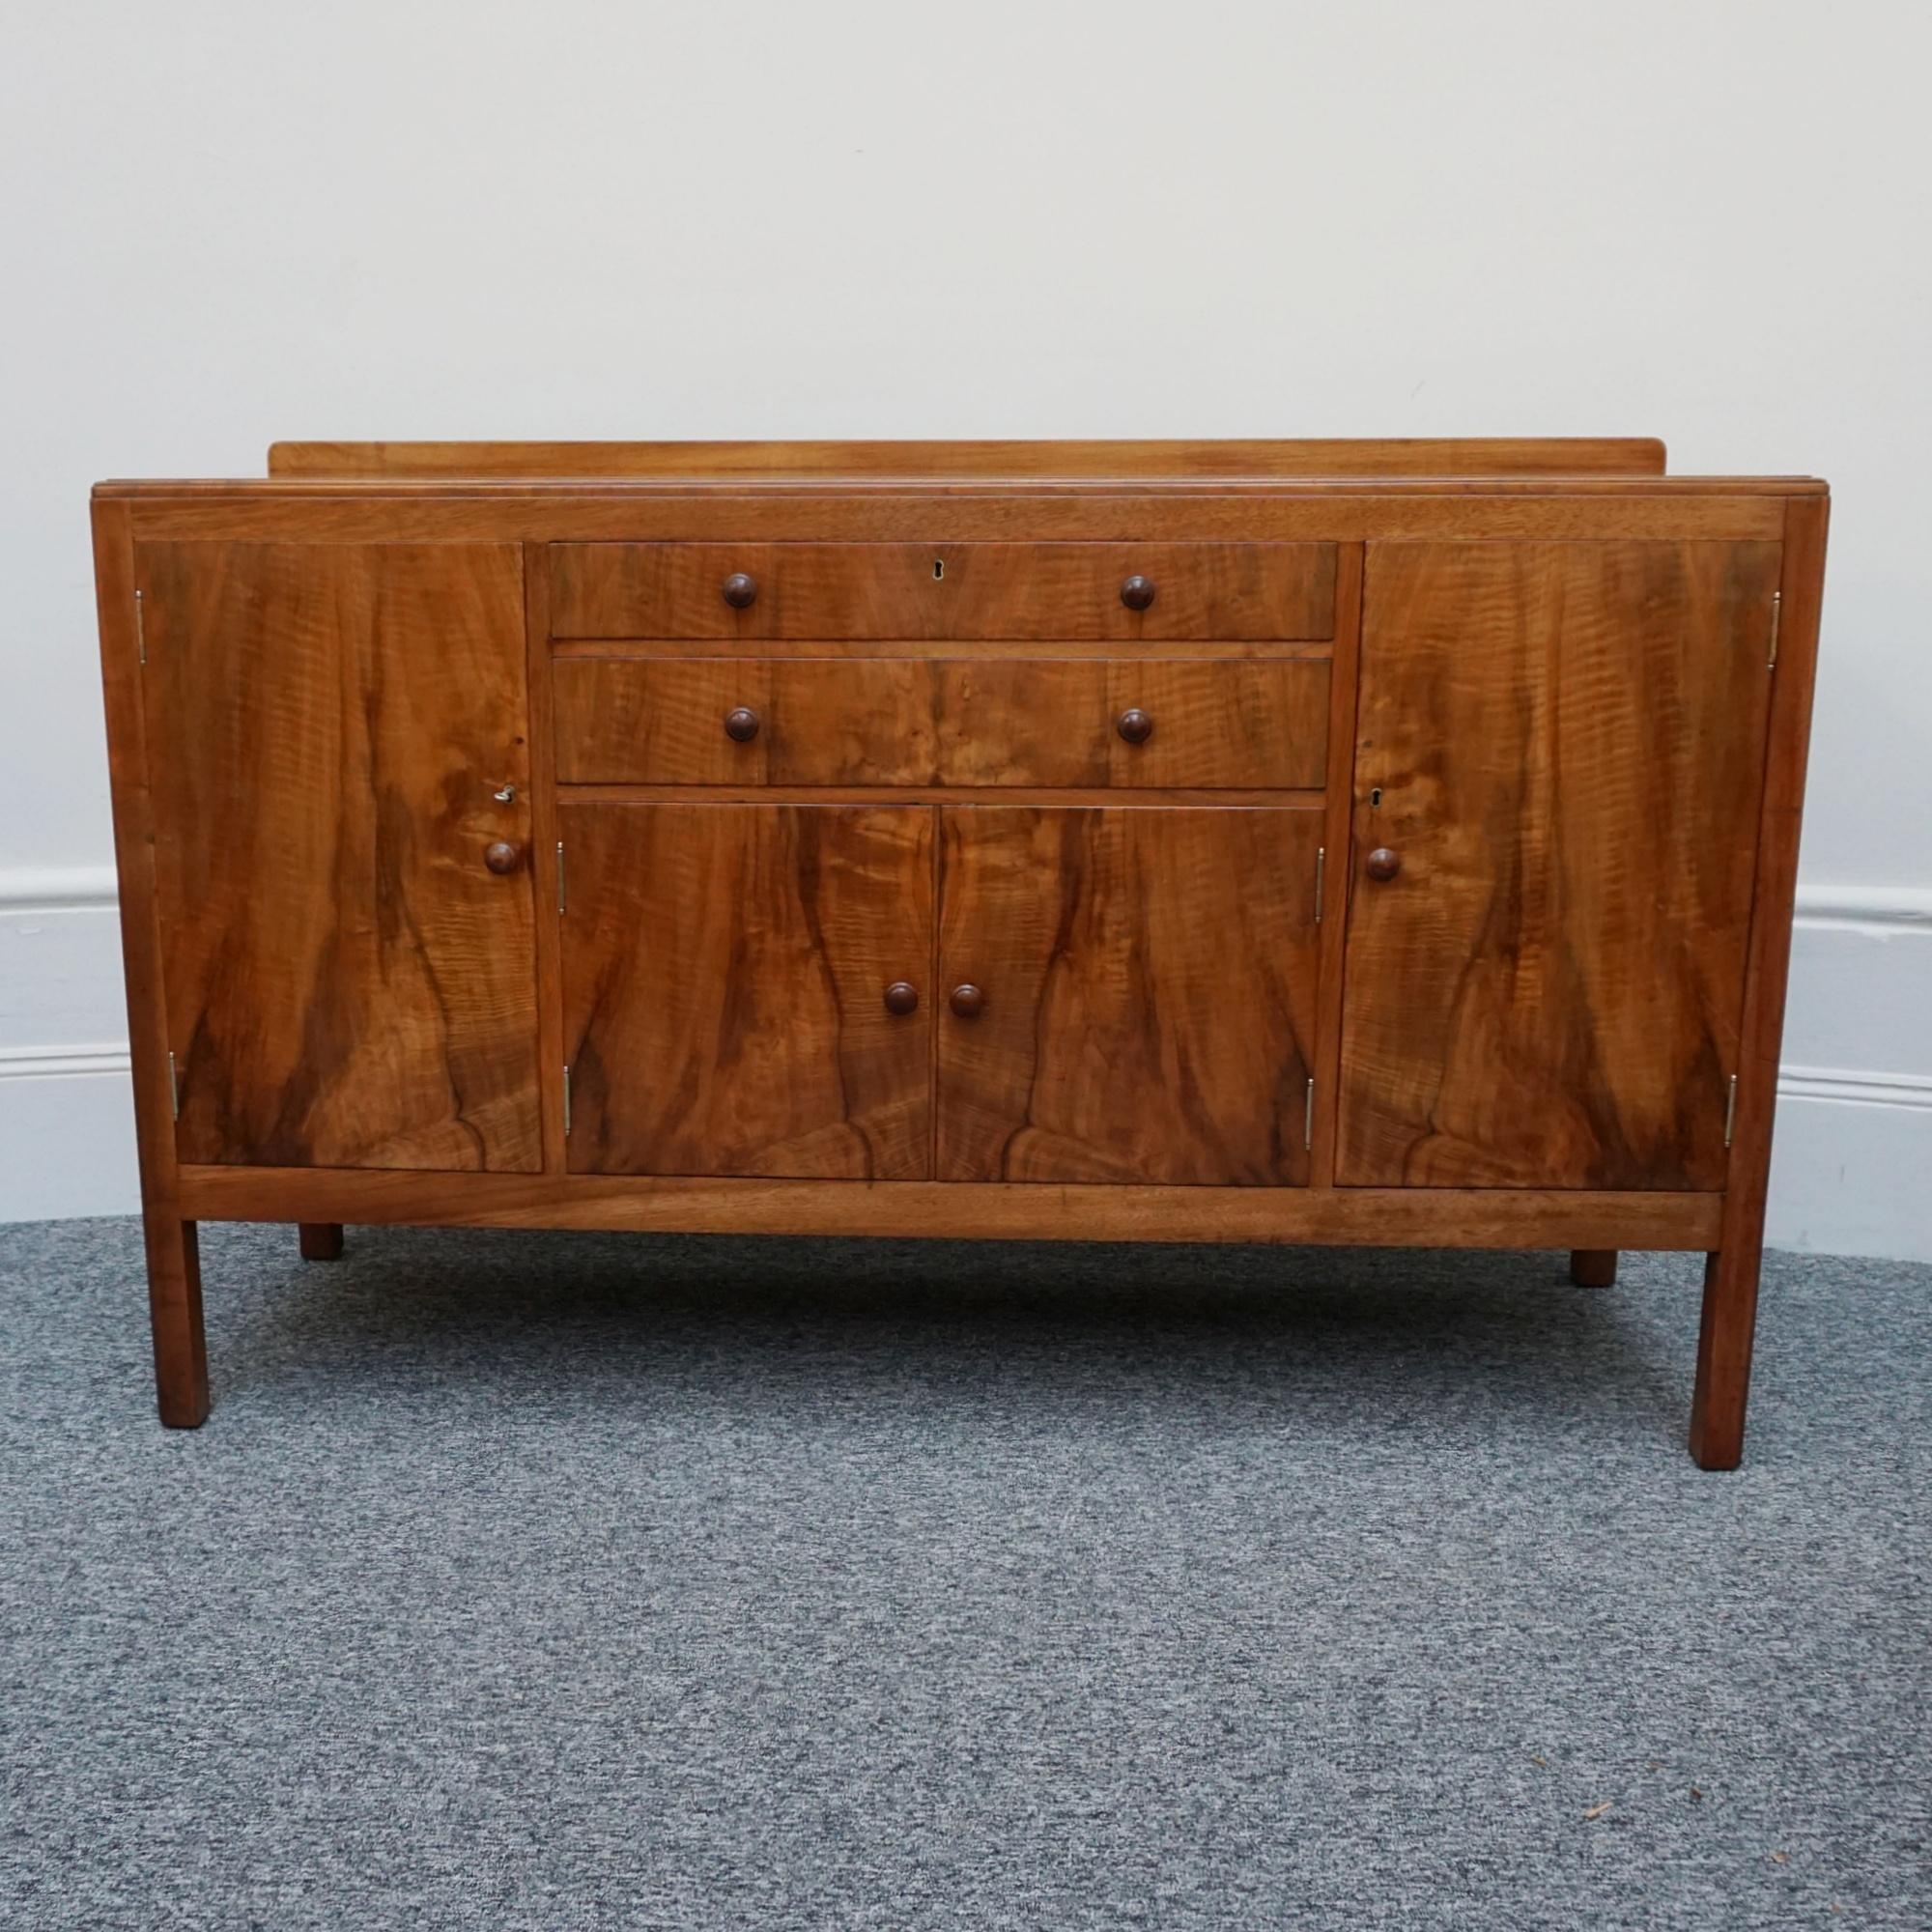 English Vintage Art Deco Sideboard by Heal's of London Burr and Figured Walnut For Sale